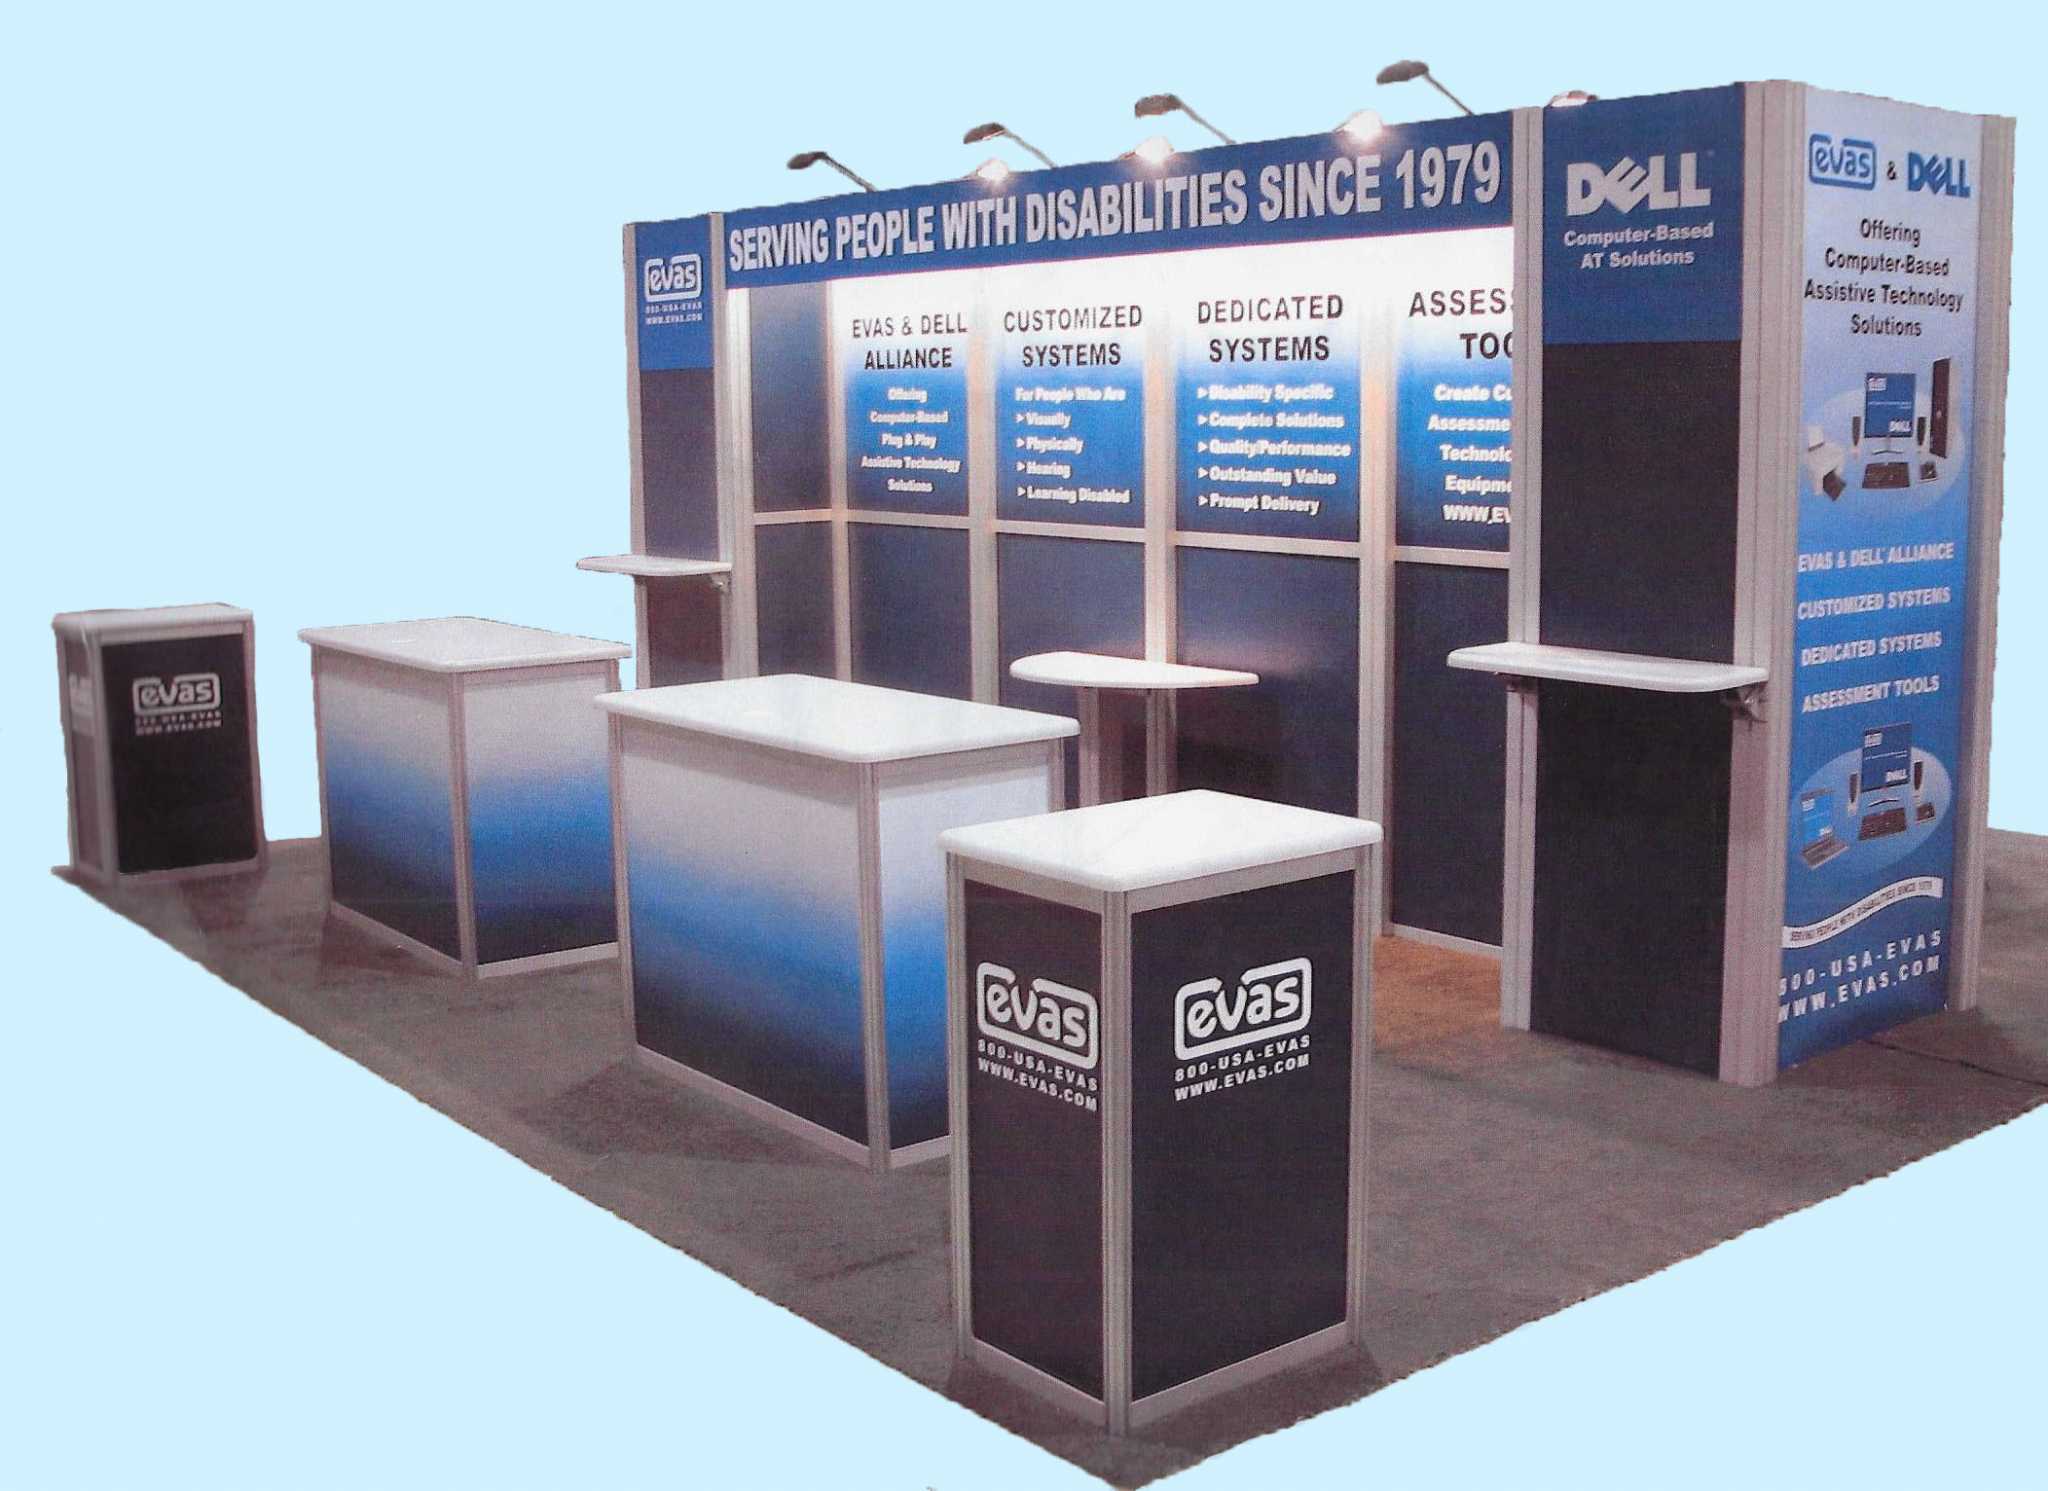 Velocity, 20ft x 20ft custom modular exhibit, blue and silver laminate with aluminum extrusions, includes monitors, locking counters, shelves, halogen lights and flooring. Reconfigurable to a 10ft x 20ft or 10ft x 40ft display. Excellent condition.